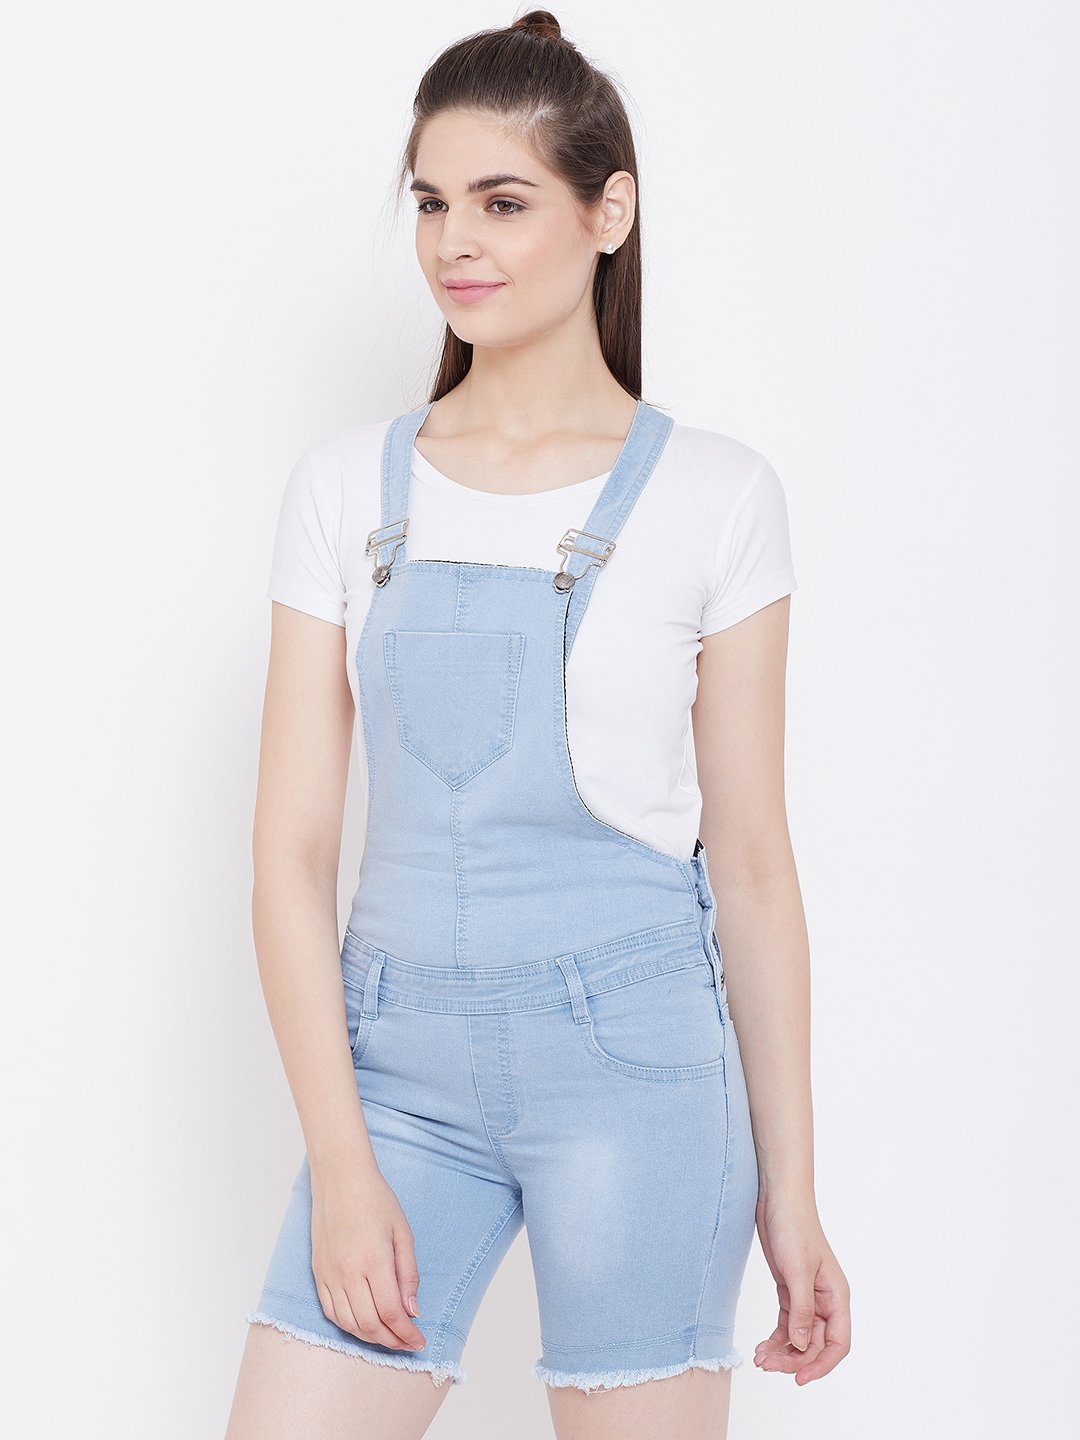 Stretchable Sky Blue Shorts Dungarees - NiftyJeans